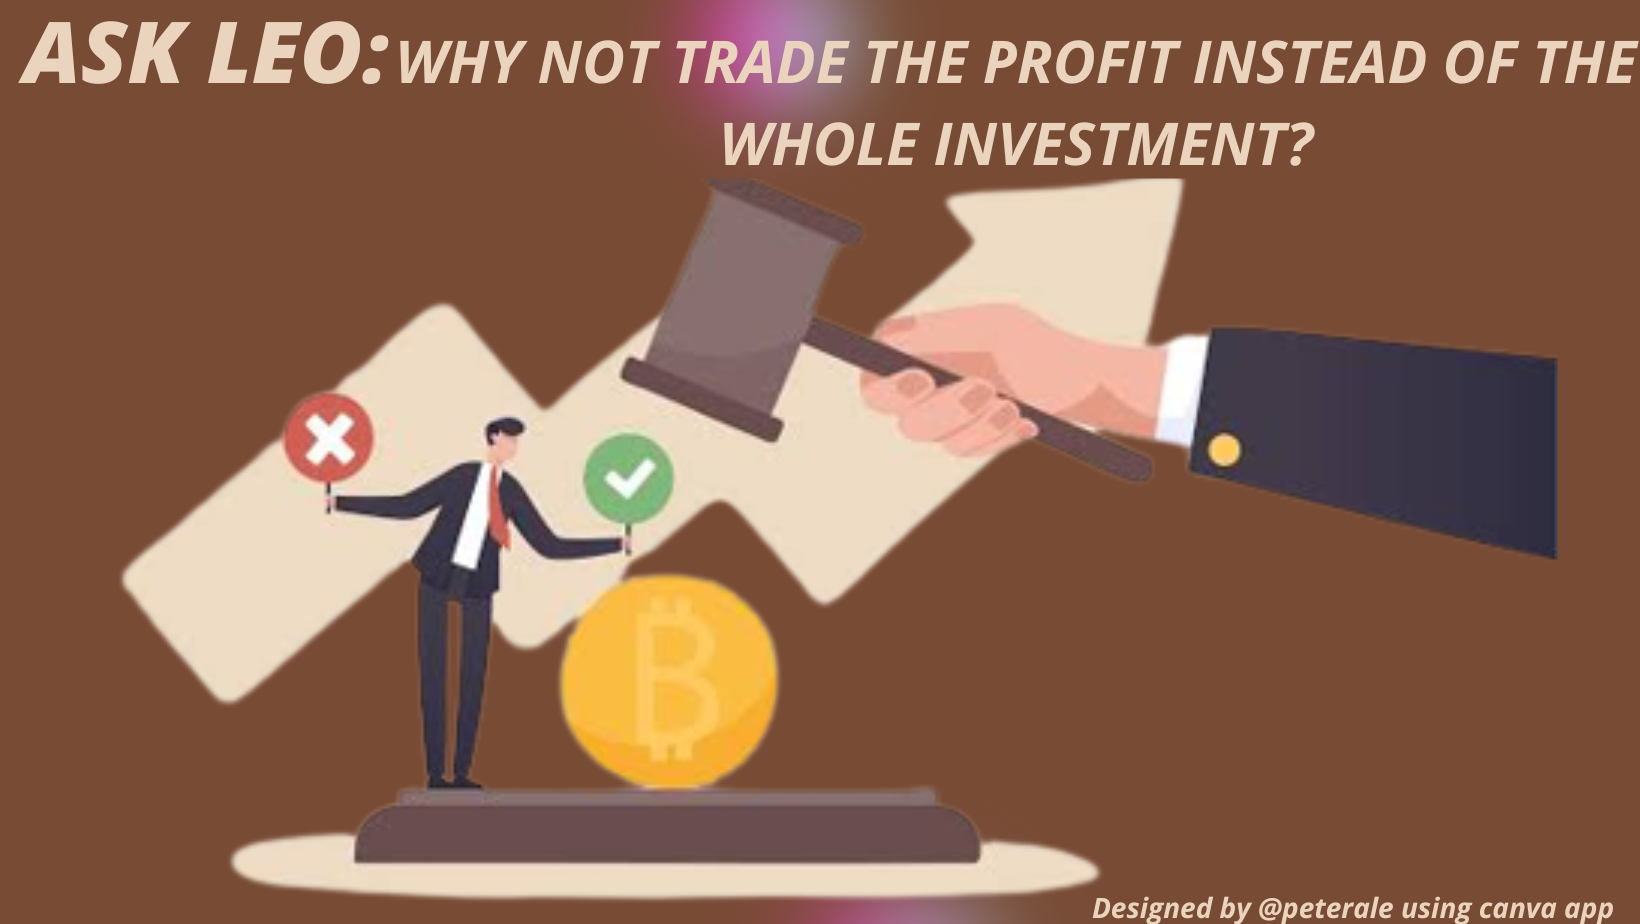 @peterale/ask-leo-why-not-trade-the-profit-instead-of-the-whole-investment